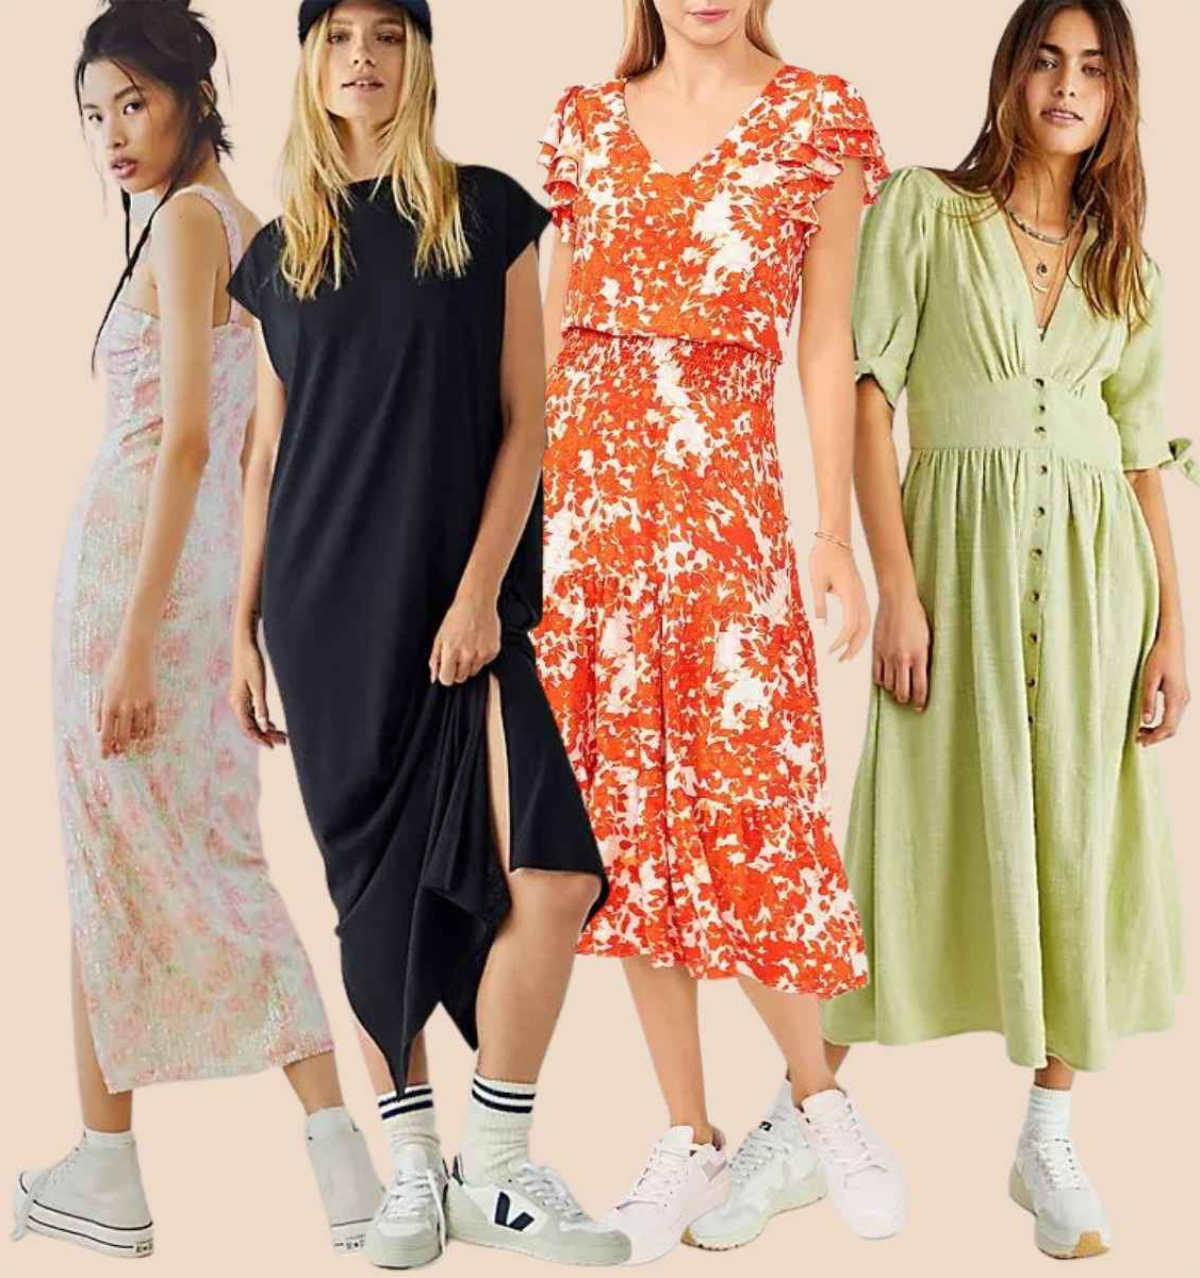 Collage of 4 women wearing different white sneakers with midi dresses.